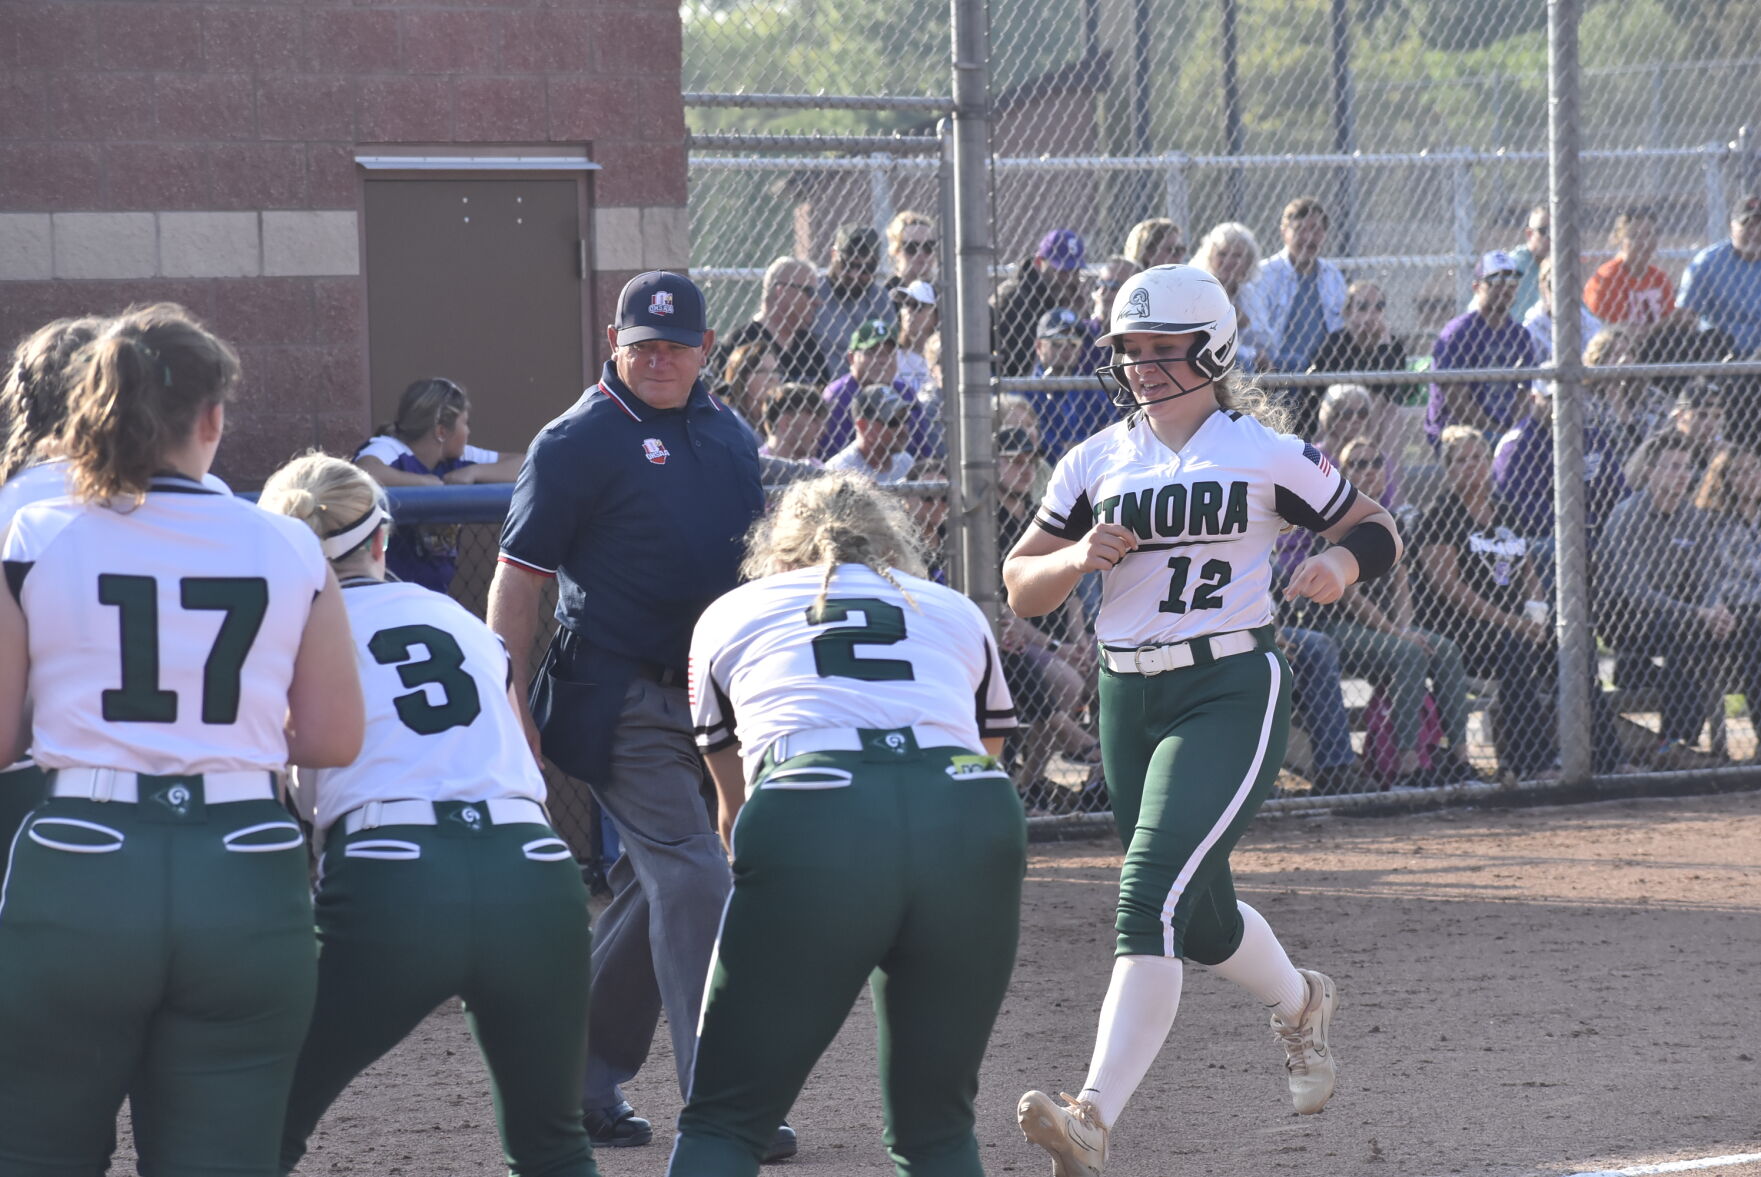 D-III District Softball: Tinora vs. Oak Harbor District Final Rematch Sparks Excitement